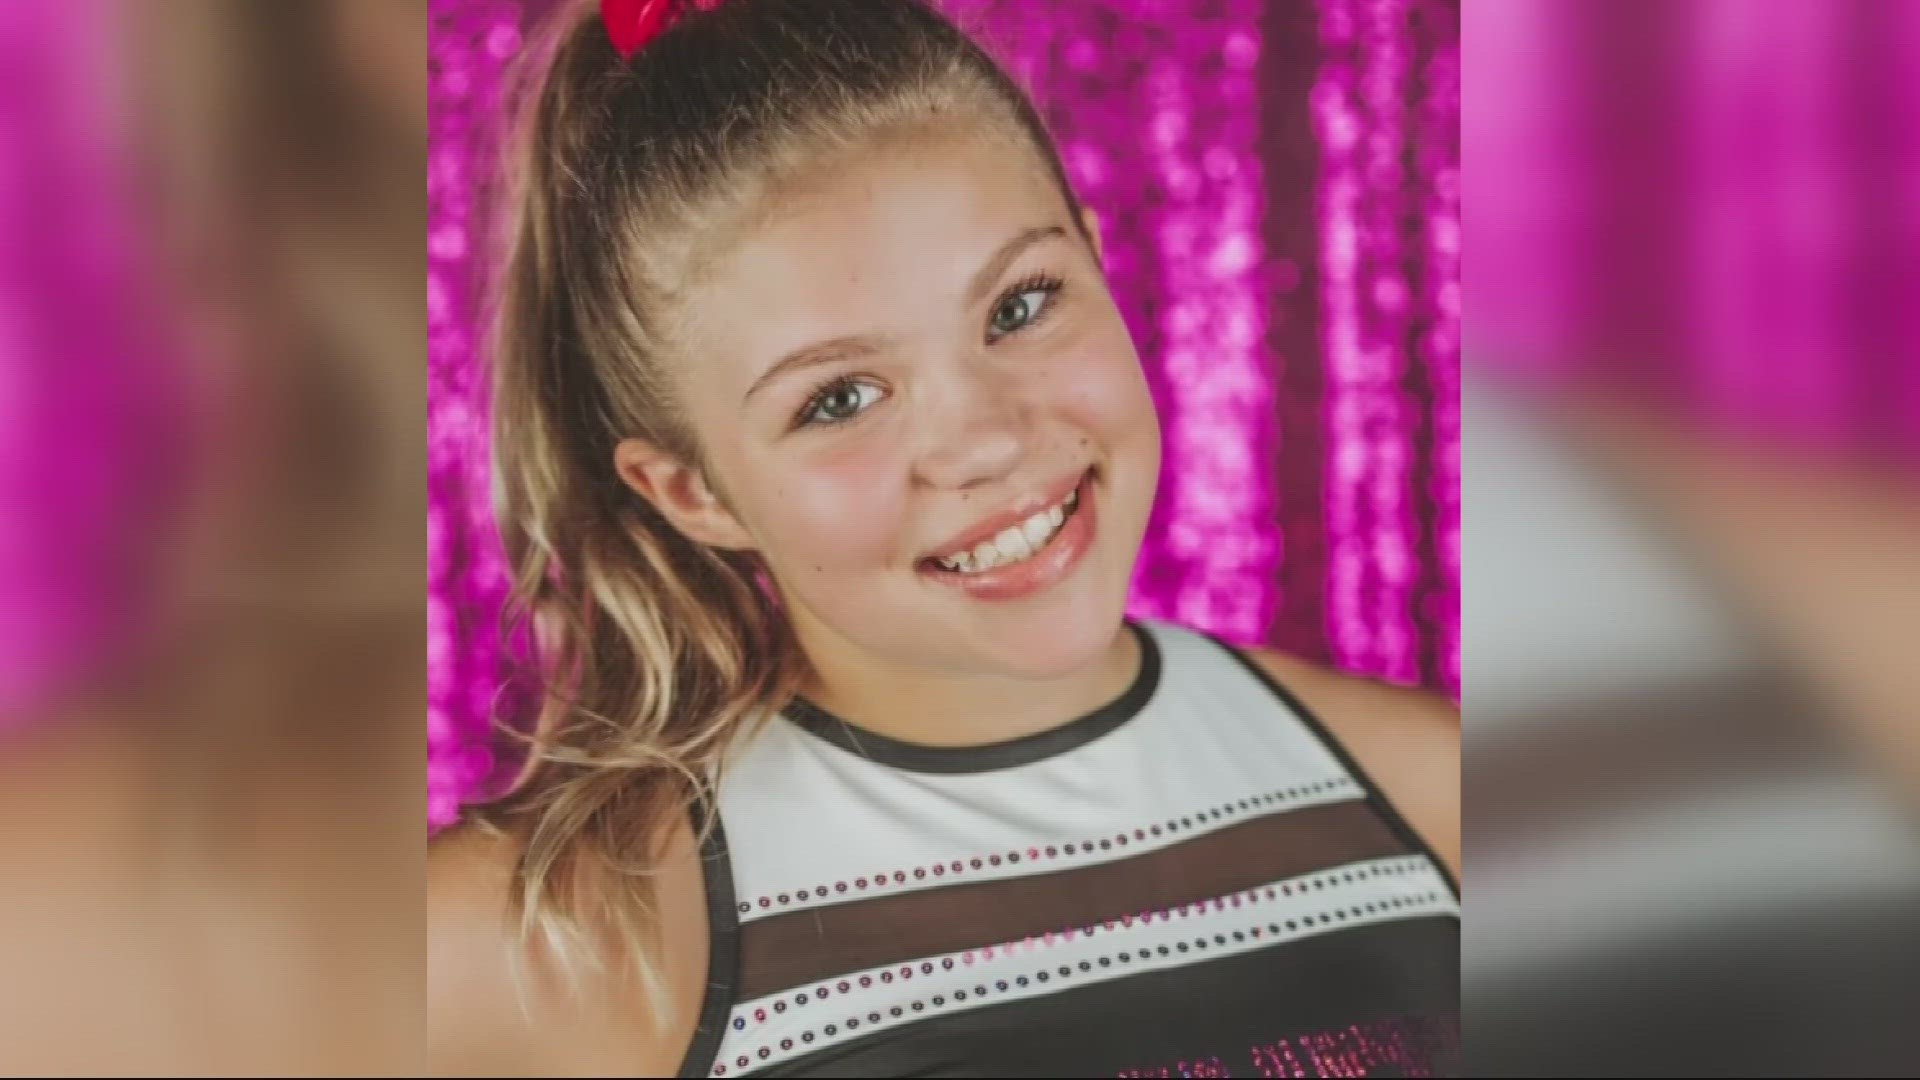 Tristyn Bailey, 13, was murdered on May 9, 2021. Her family and friends are now focusing on carrying on her legacy.